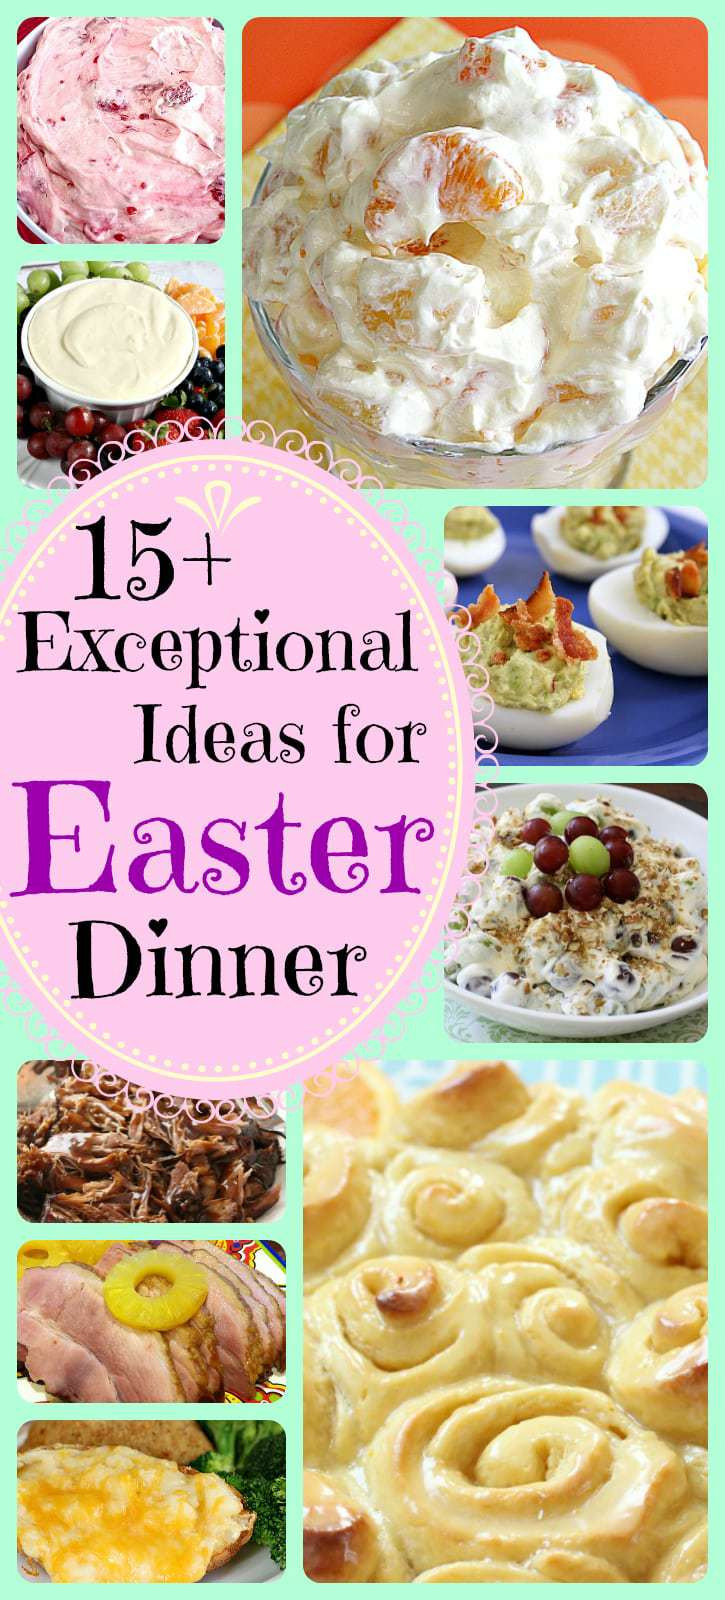 Easy Easter Meal Ideas
 EASY & DELICIOUS EASTER DINNER RECIPES Butter with a